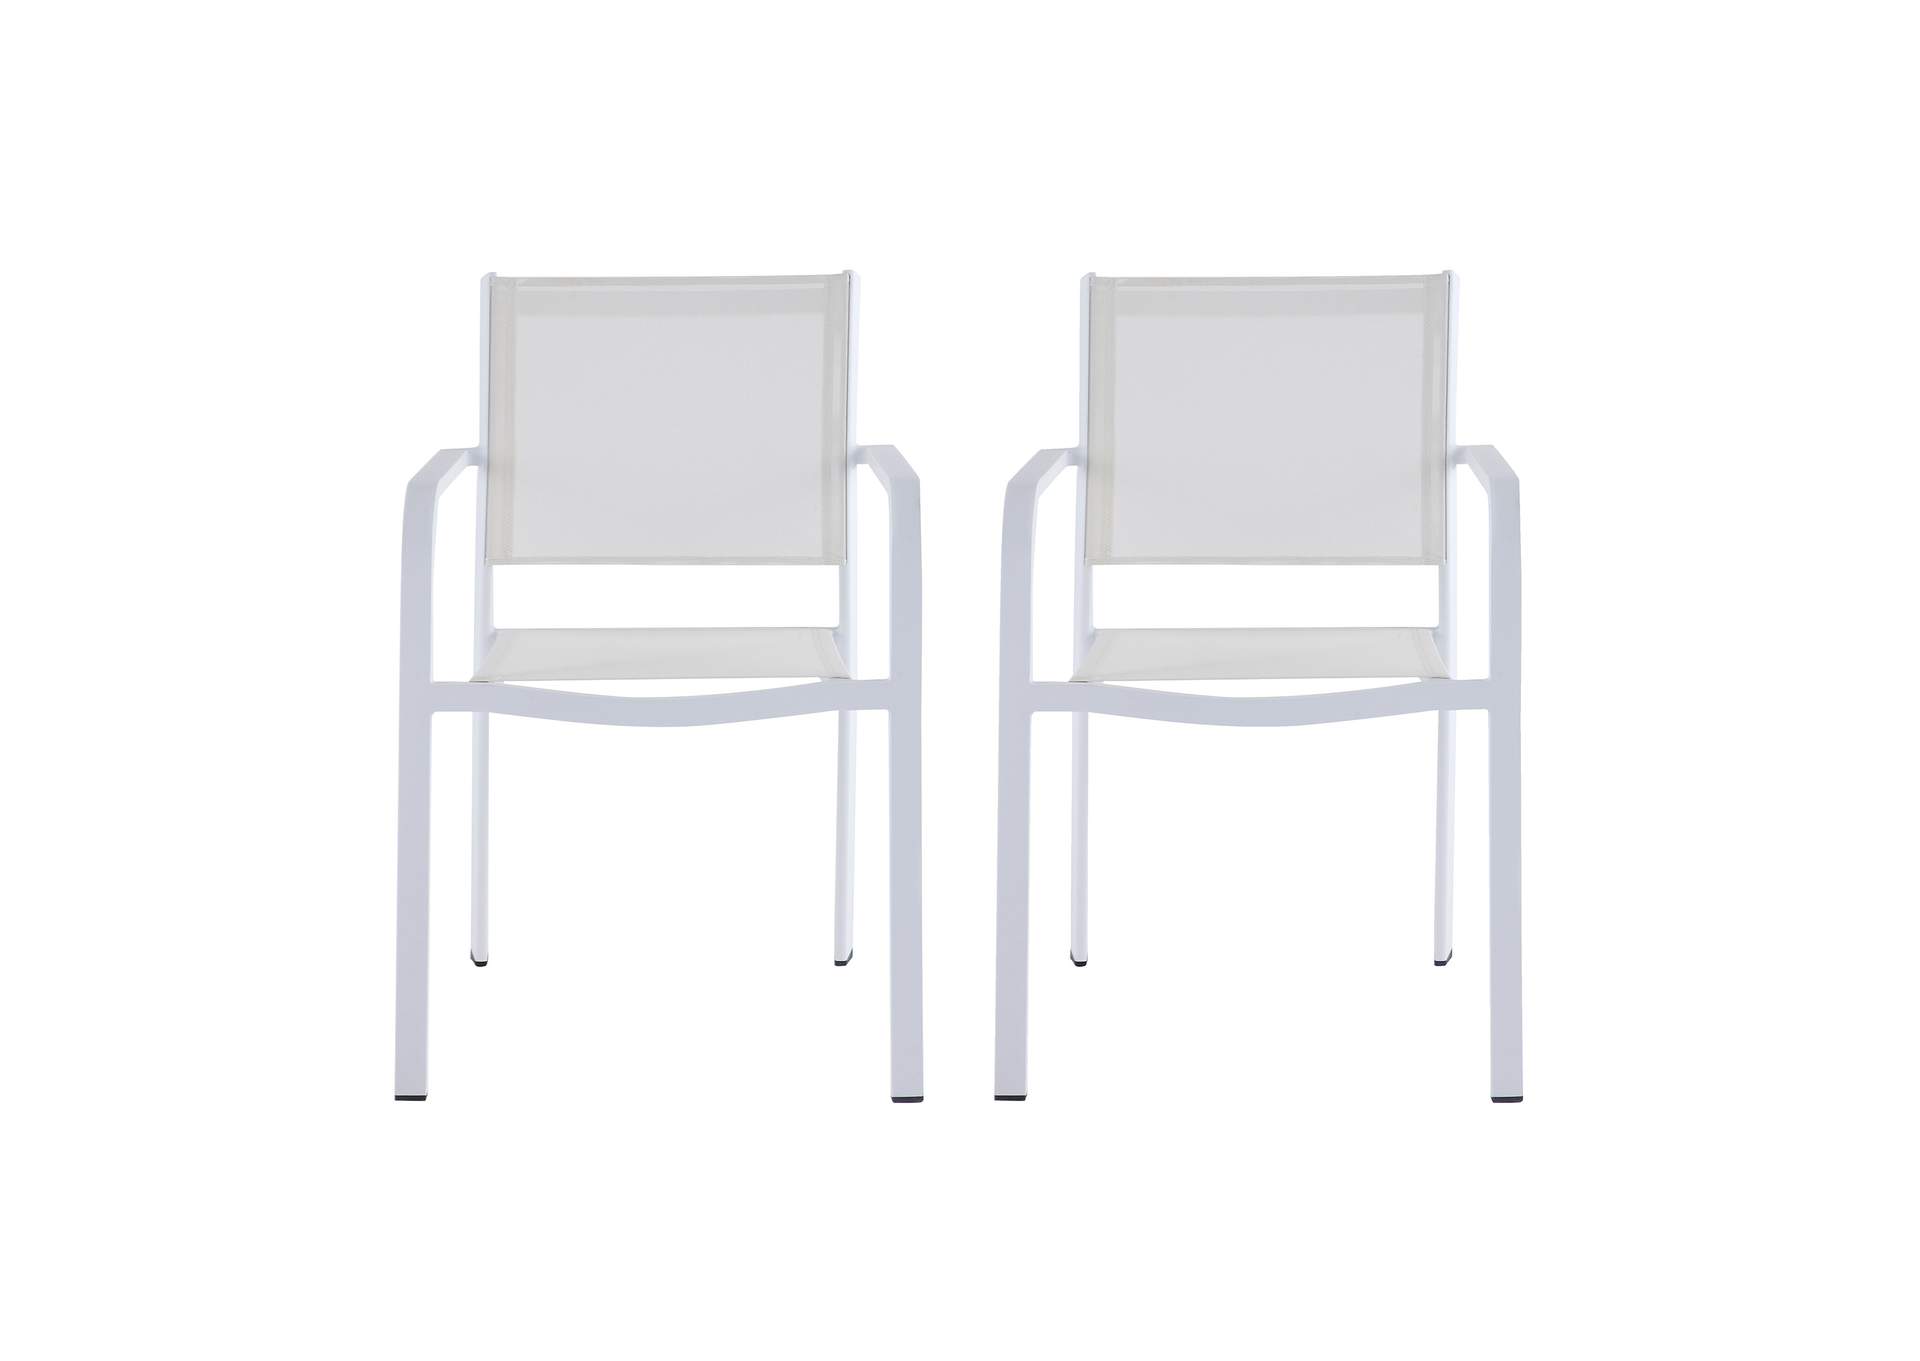 Contemporary Outdoor UV Resistant Dining Set w/ Extendable Table & LB Chairs,Chintaly Imports